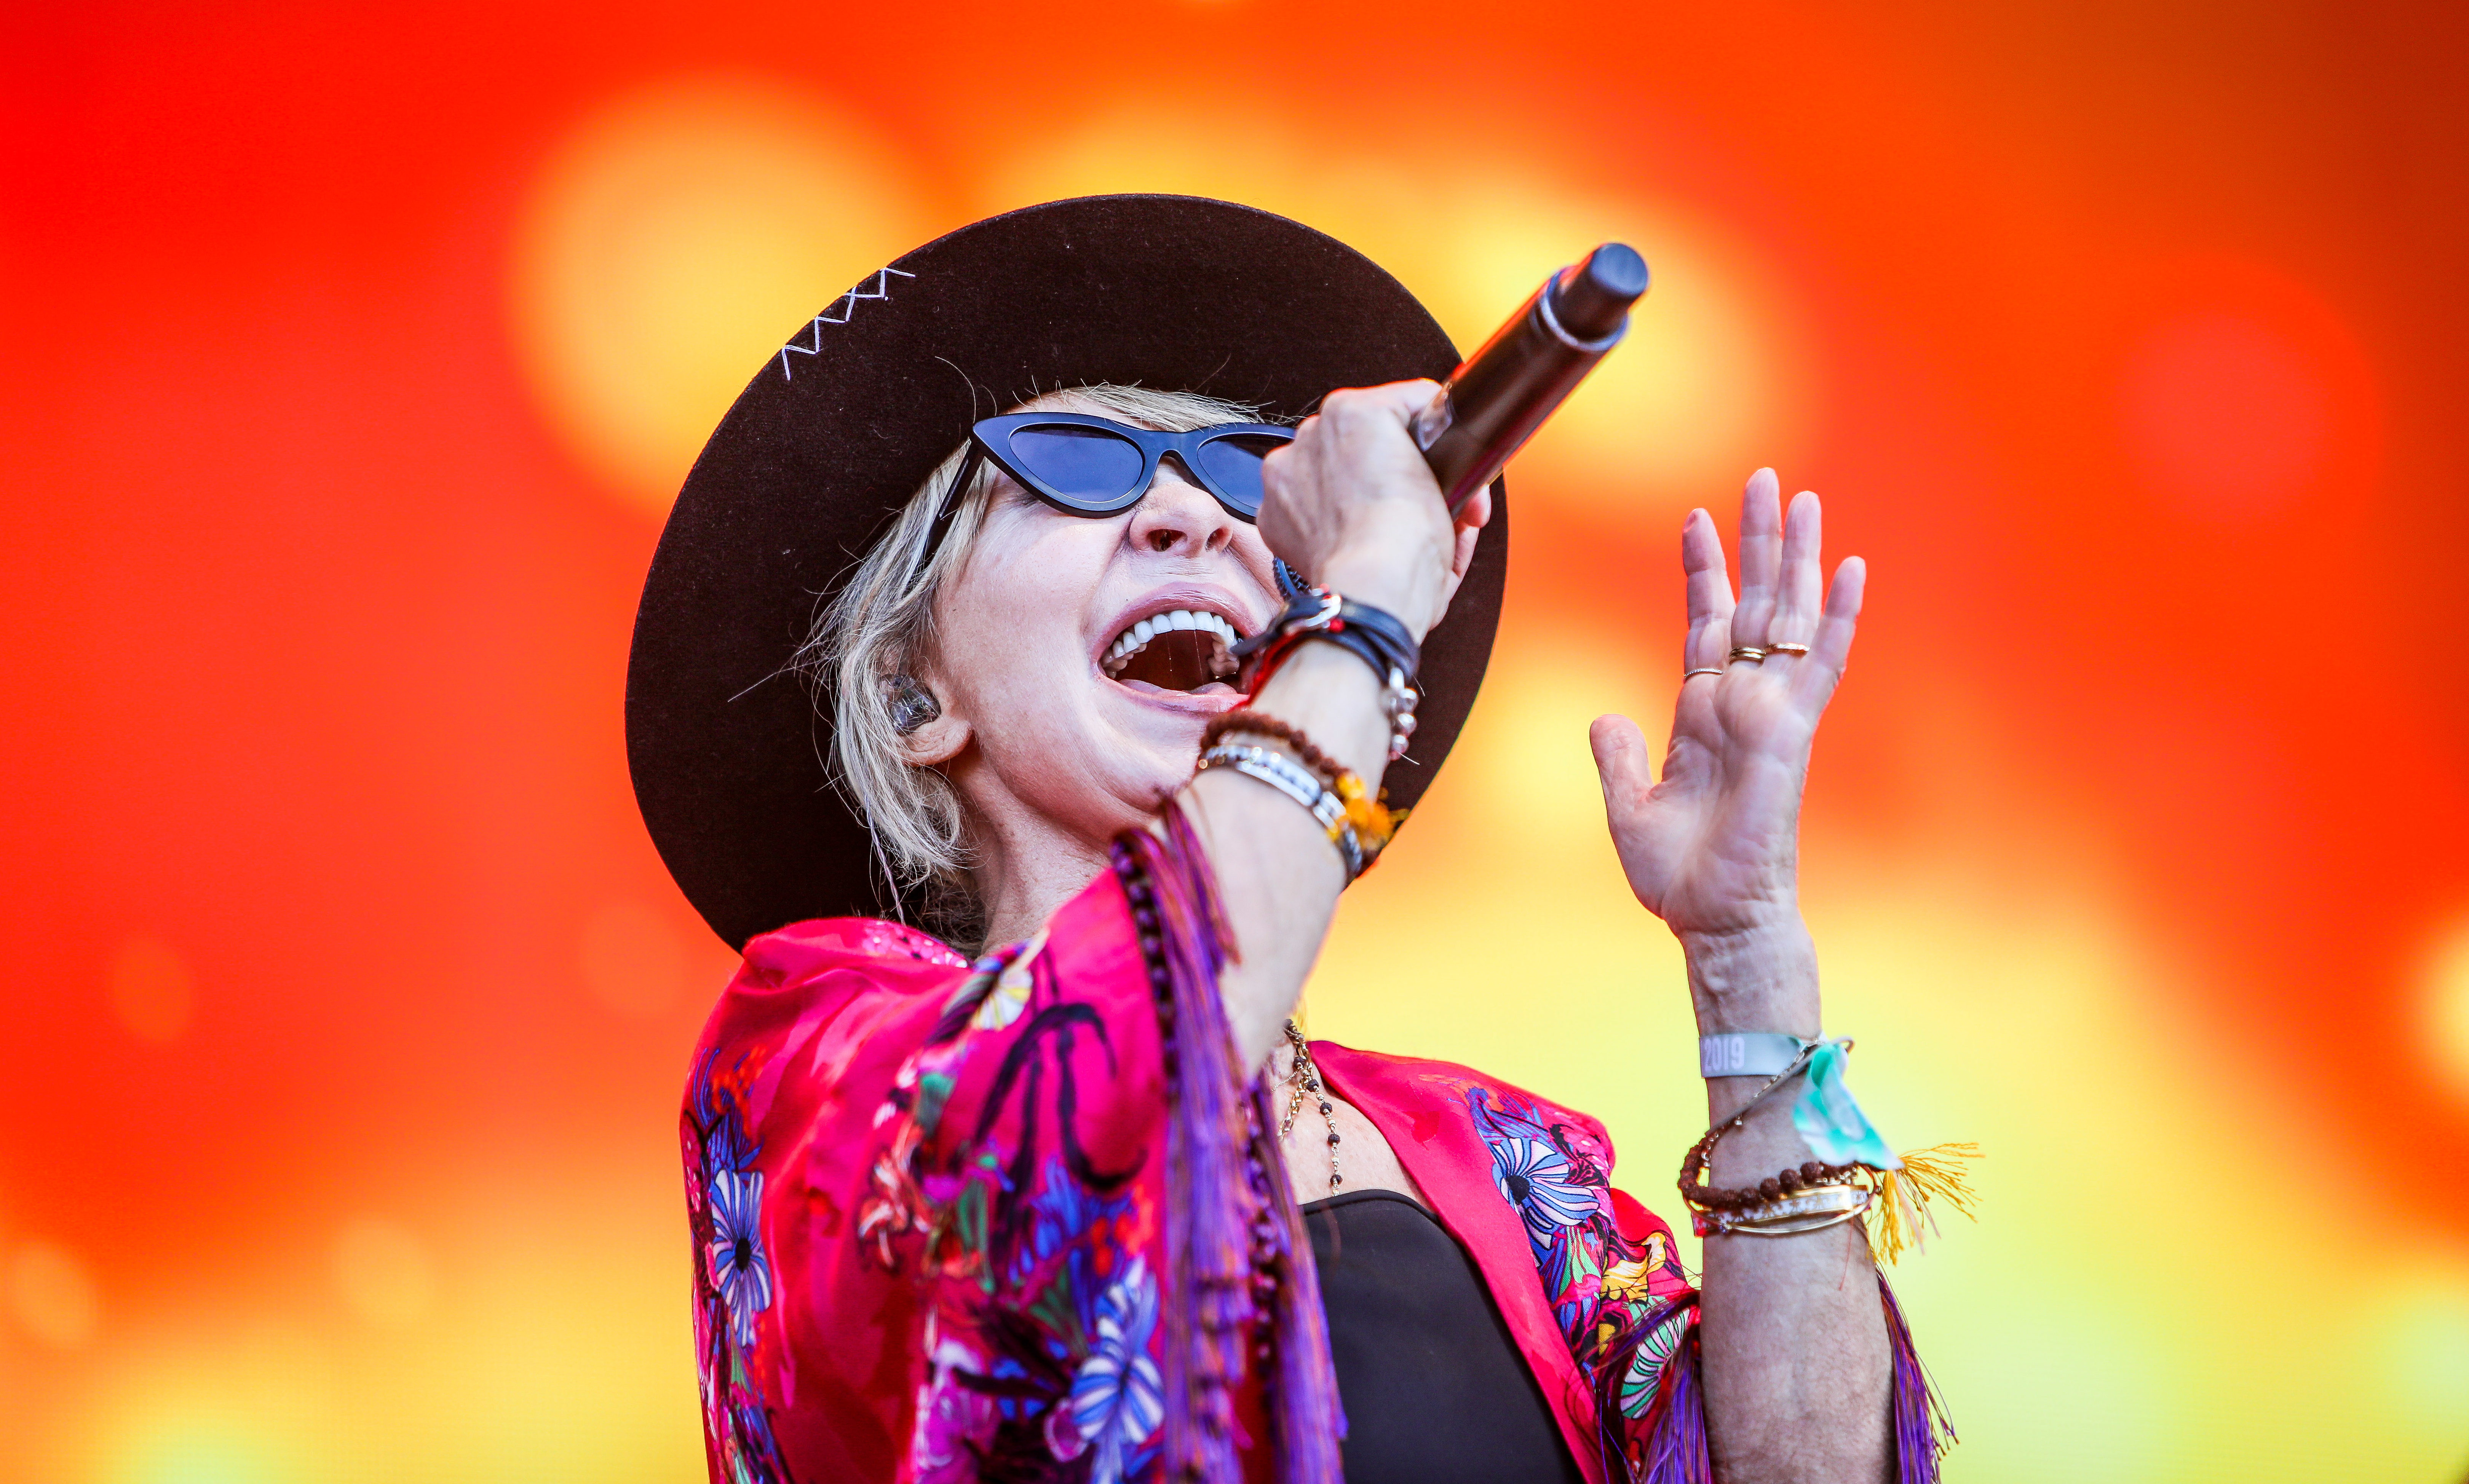 Lulu was among the highlights on day one of Rewind Scotland 2019